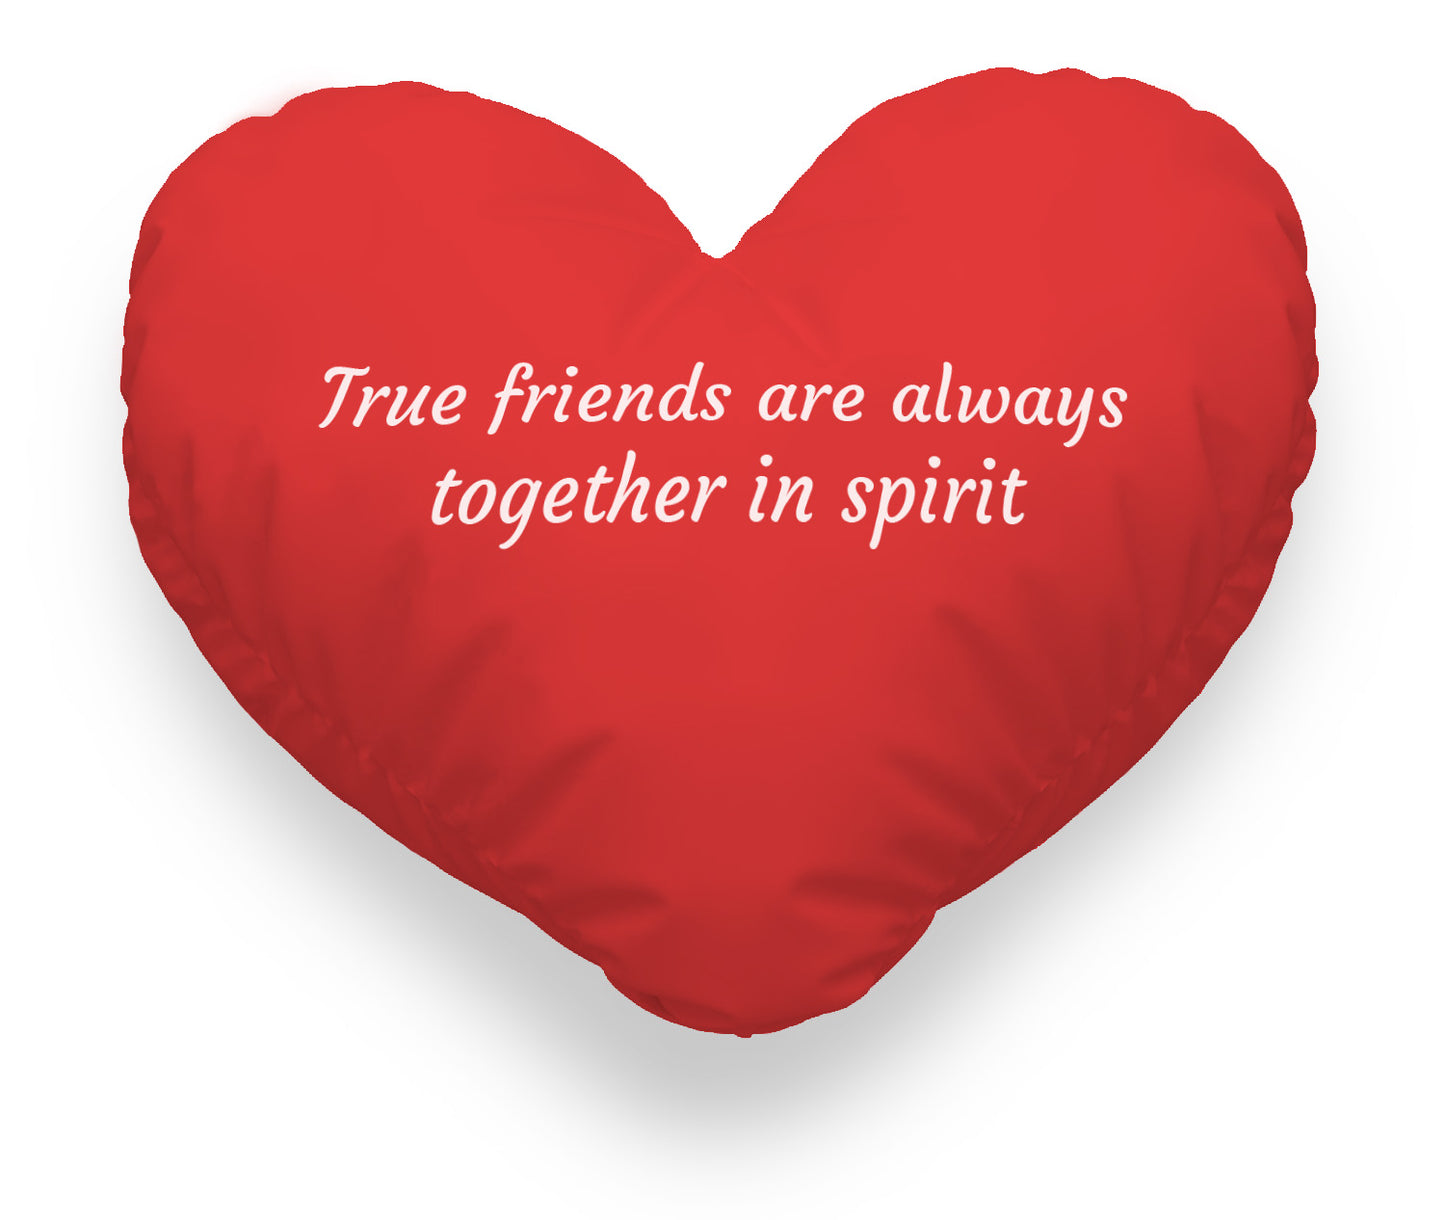 red heart cushion. yellow text "true friends are always together in spirit".